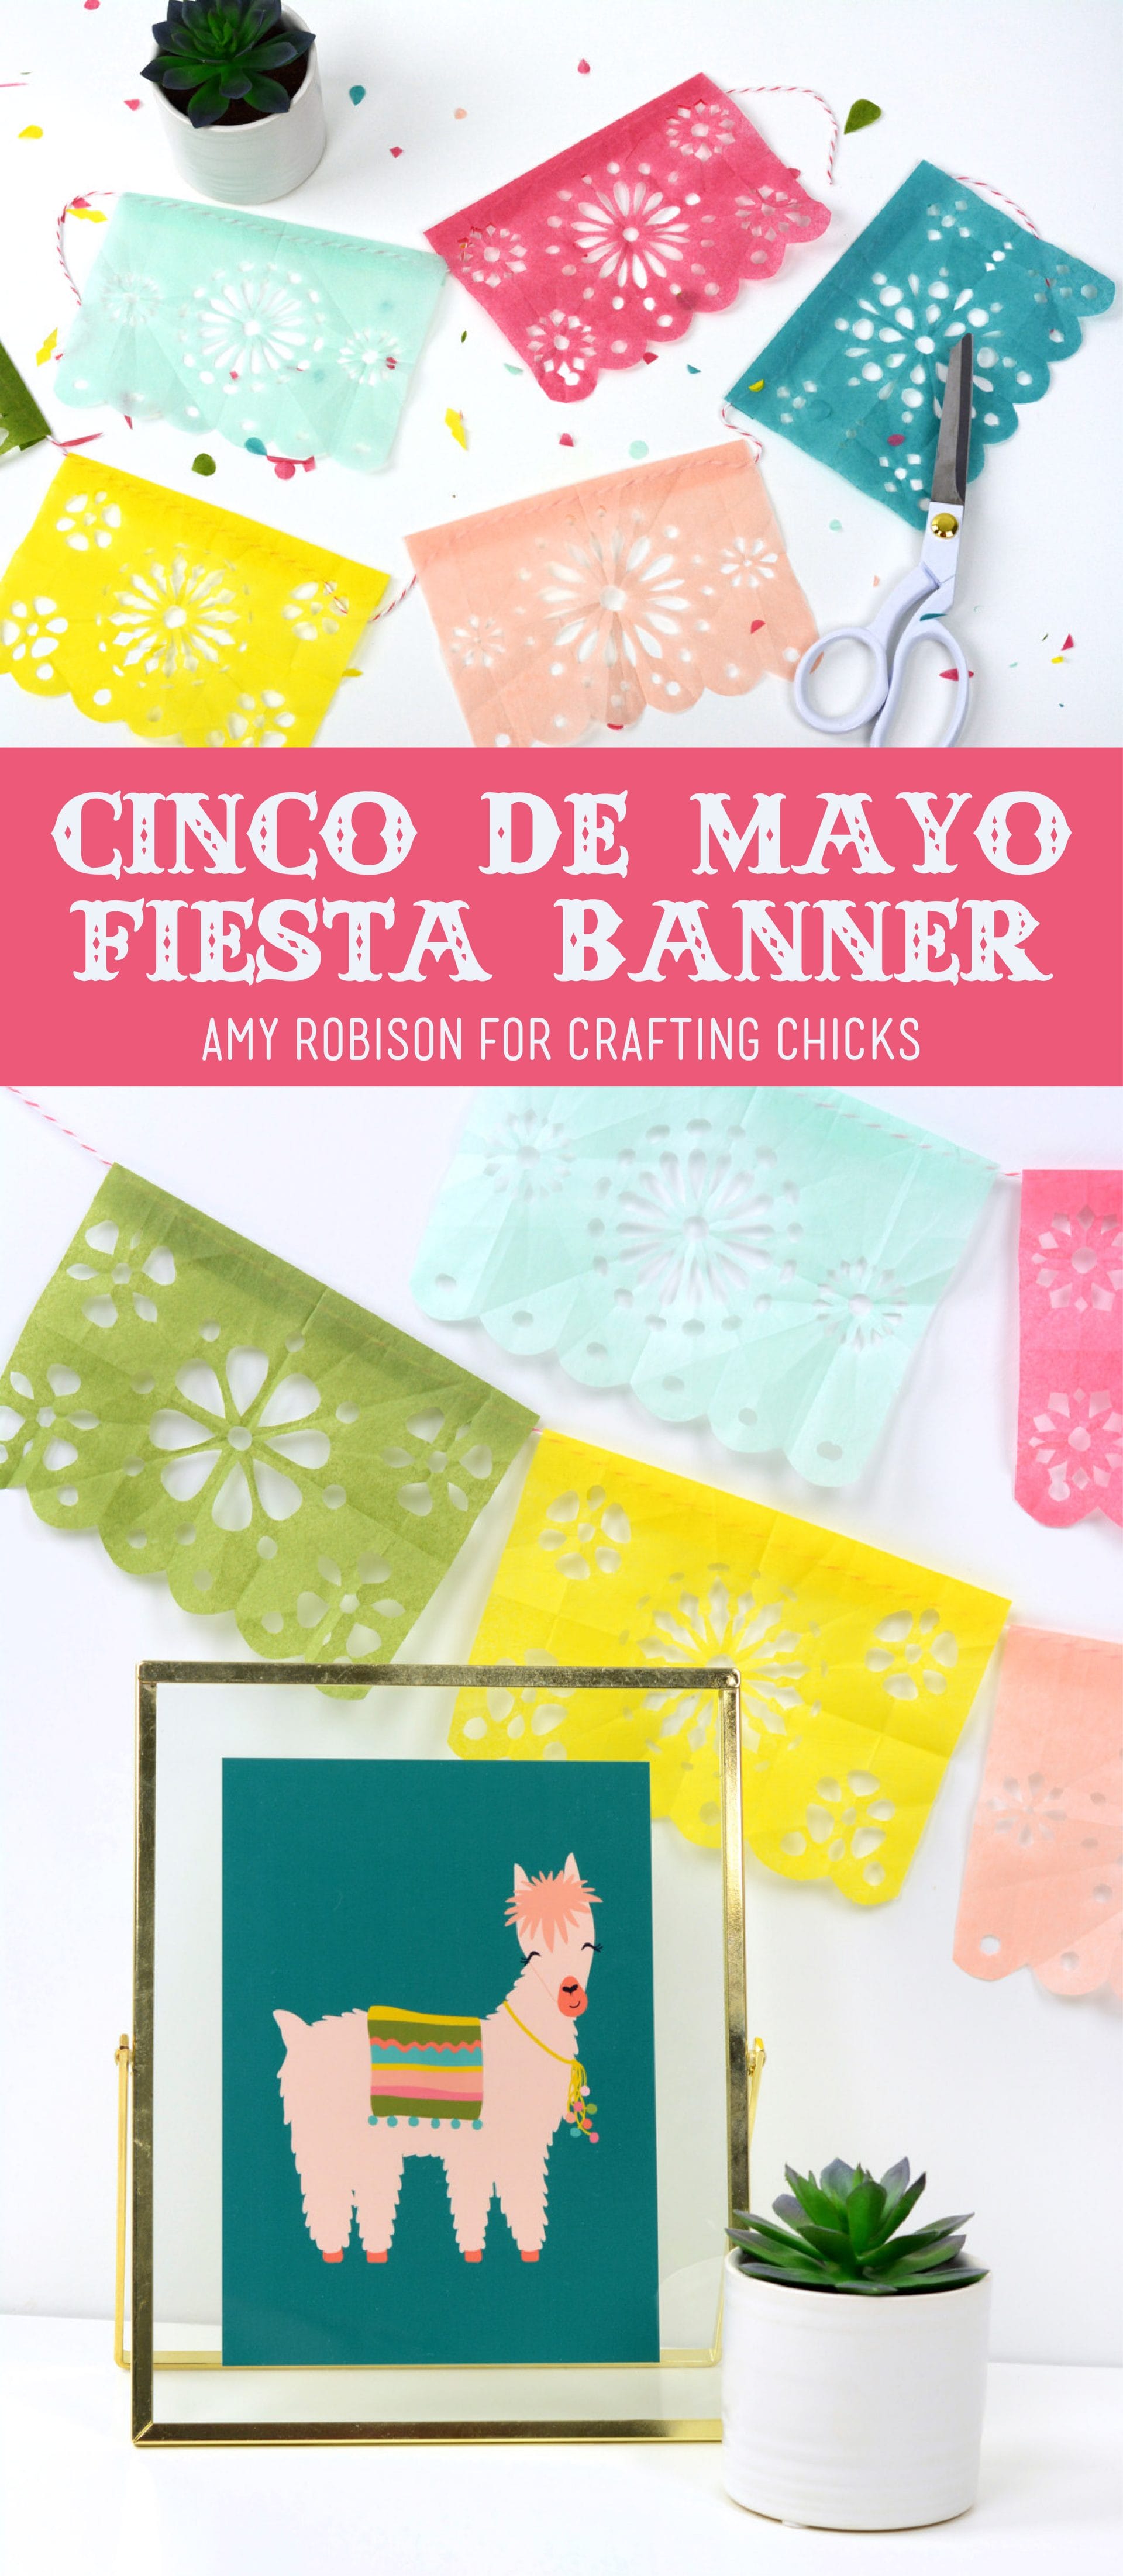 DIY Cinco de Mayo Fiesta Banner - Learn how to make a Cinco De Mayo fiesta banner using tissue paper, scissors and the easiest video tutorial that will take you step-by-step with each cut.